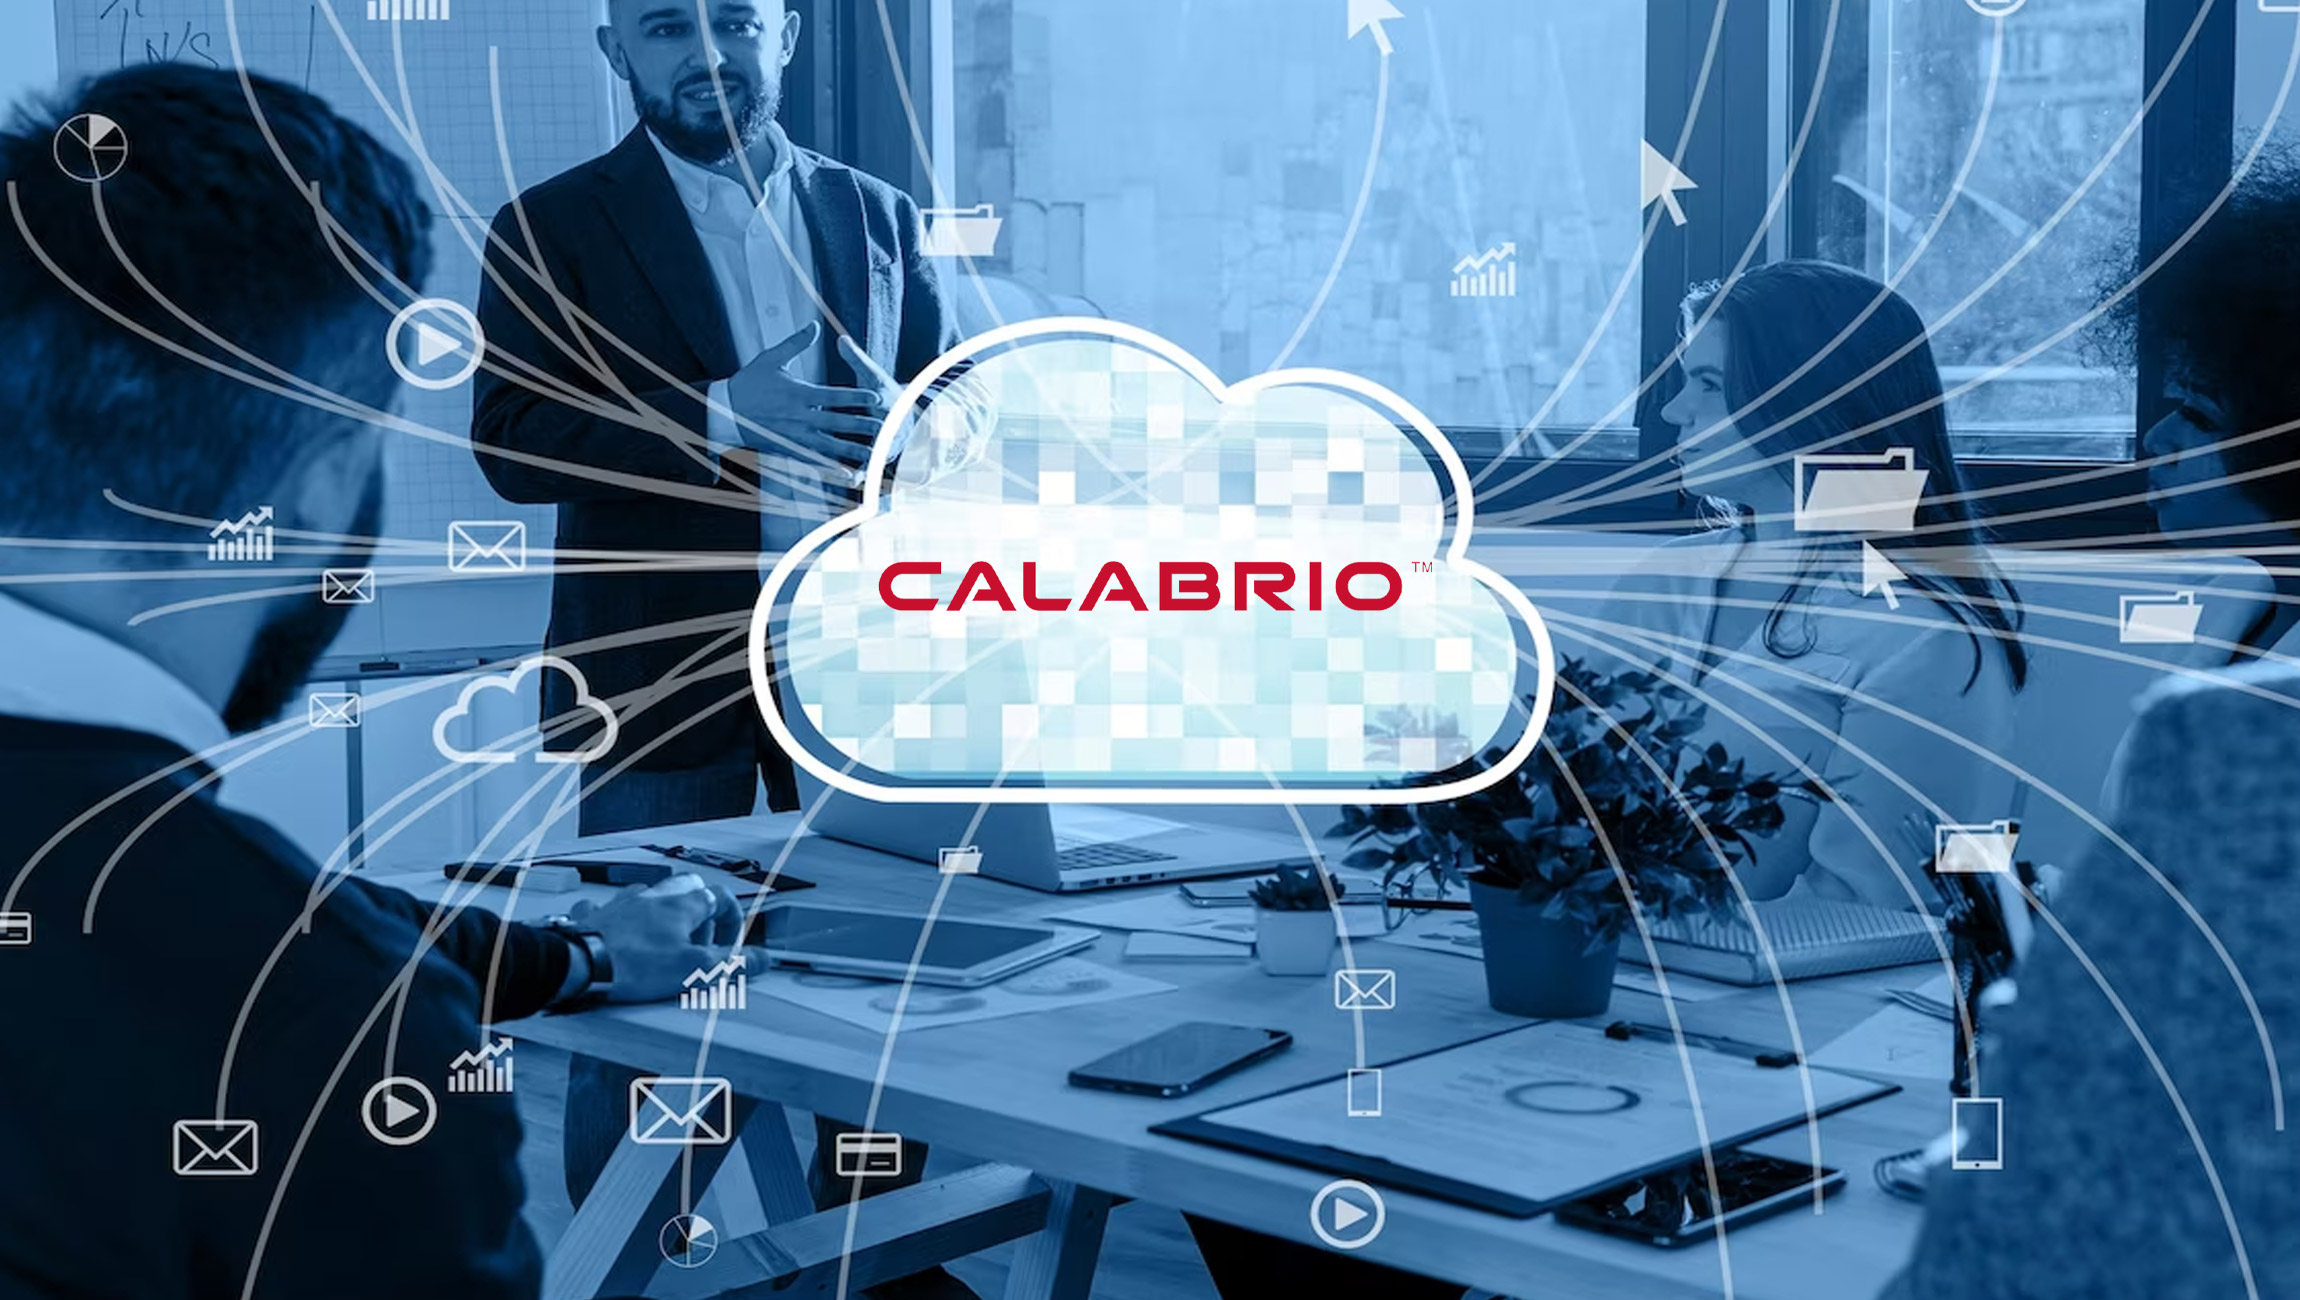 Calabrio-Expands-Presence-in-India-with-New-Cloud-Offering-for-Workforce-Engagement-Management (1)